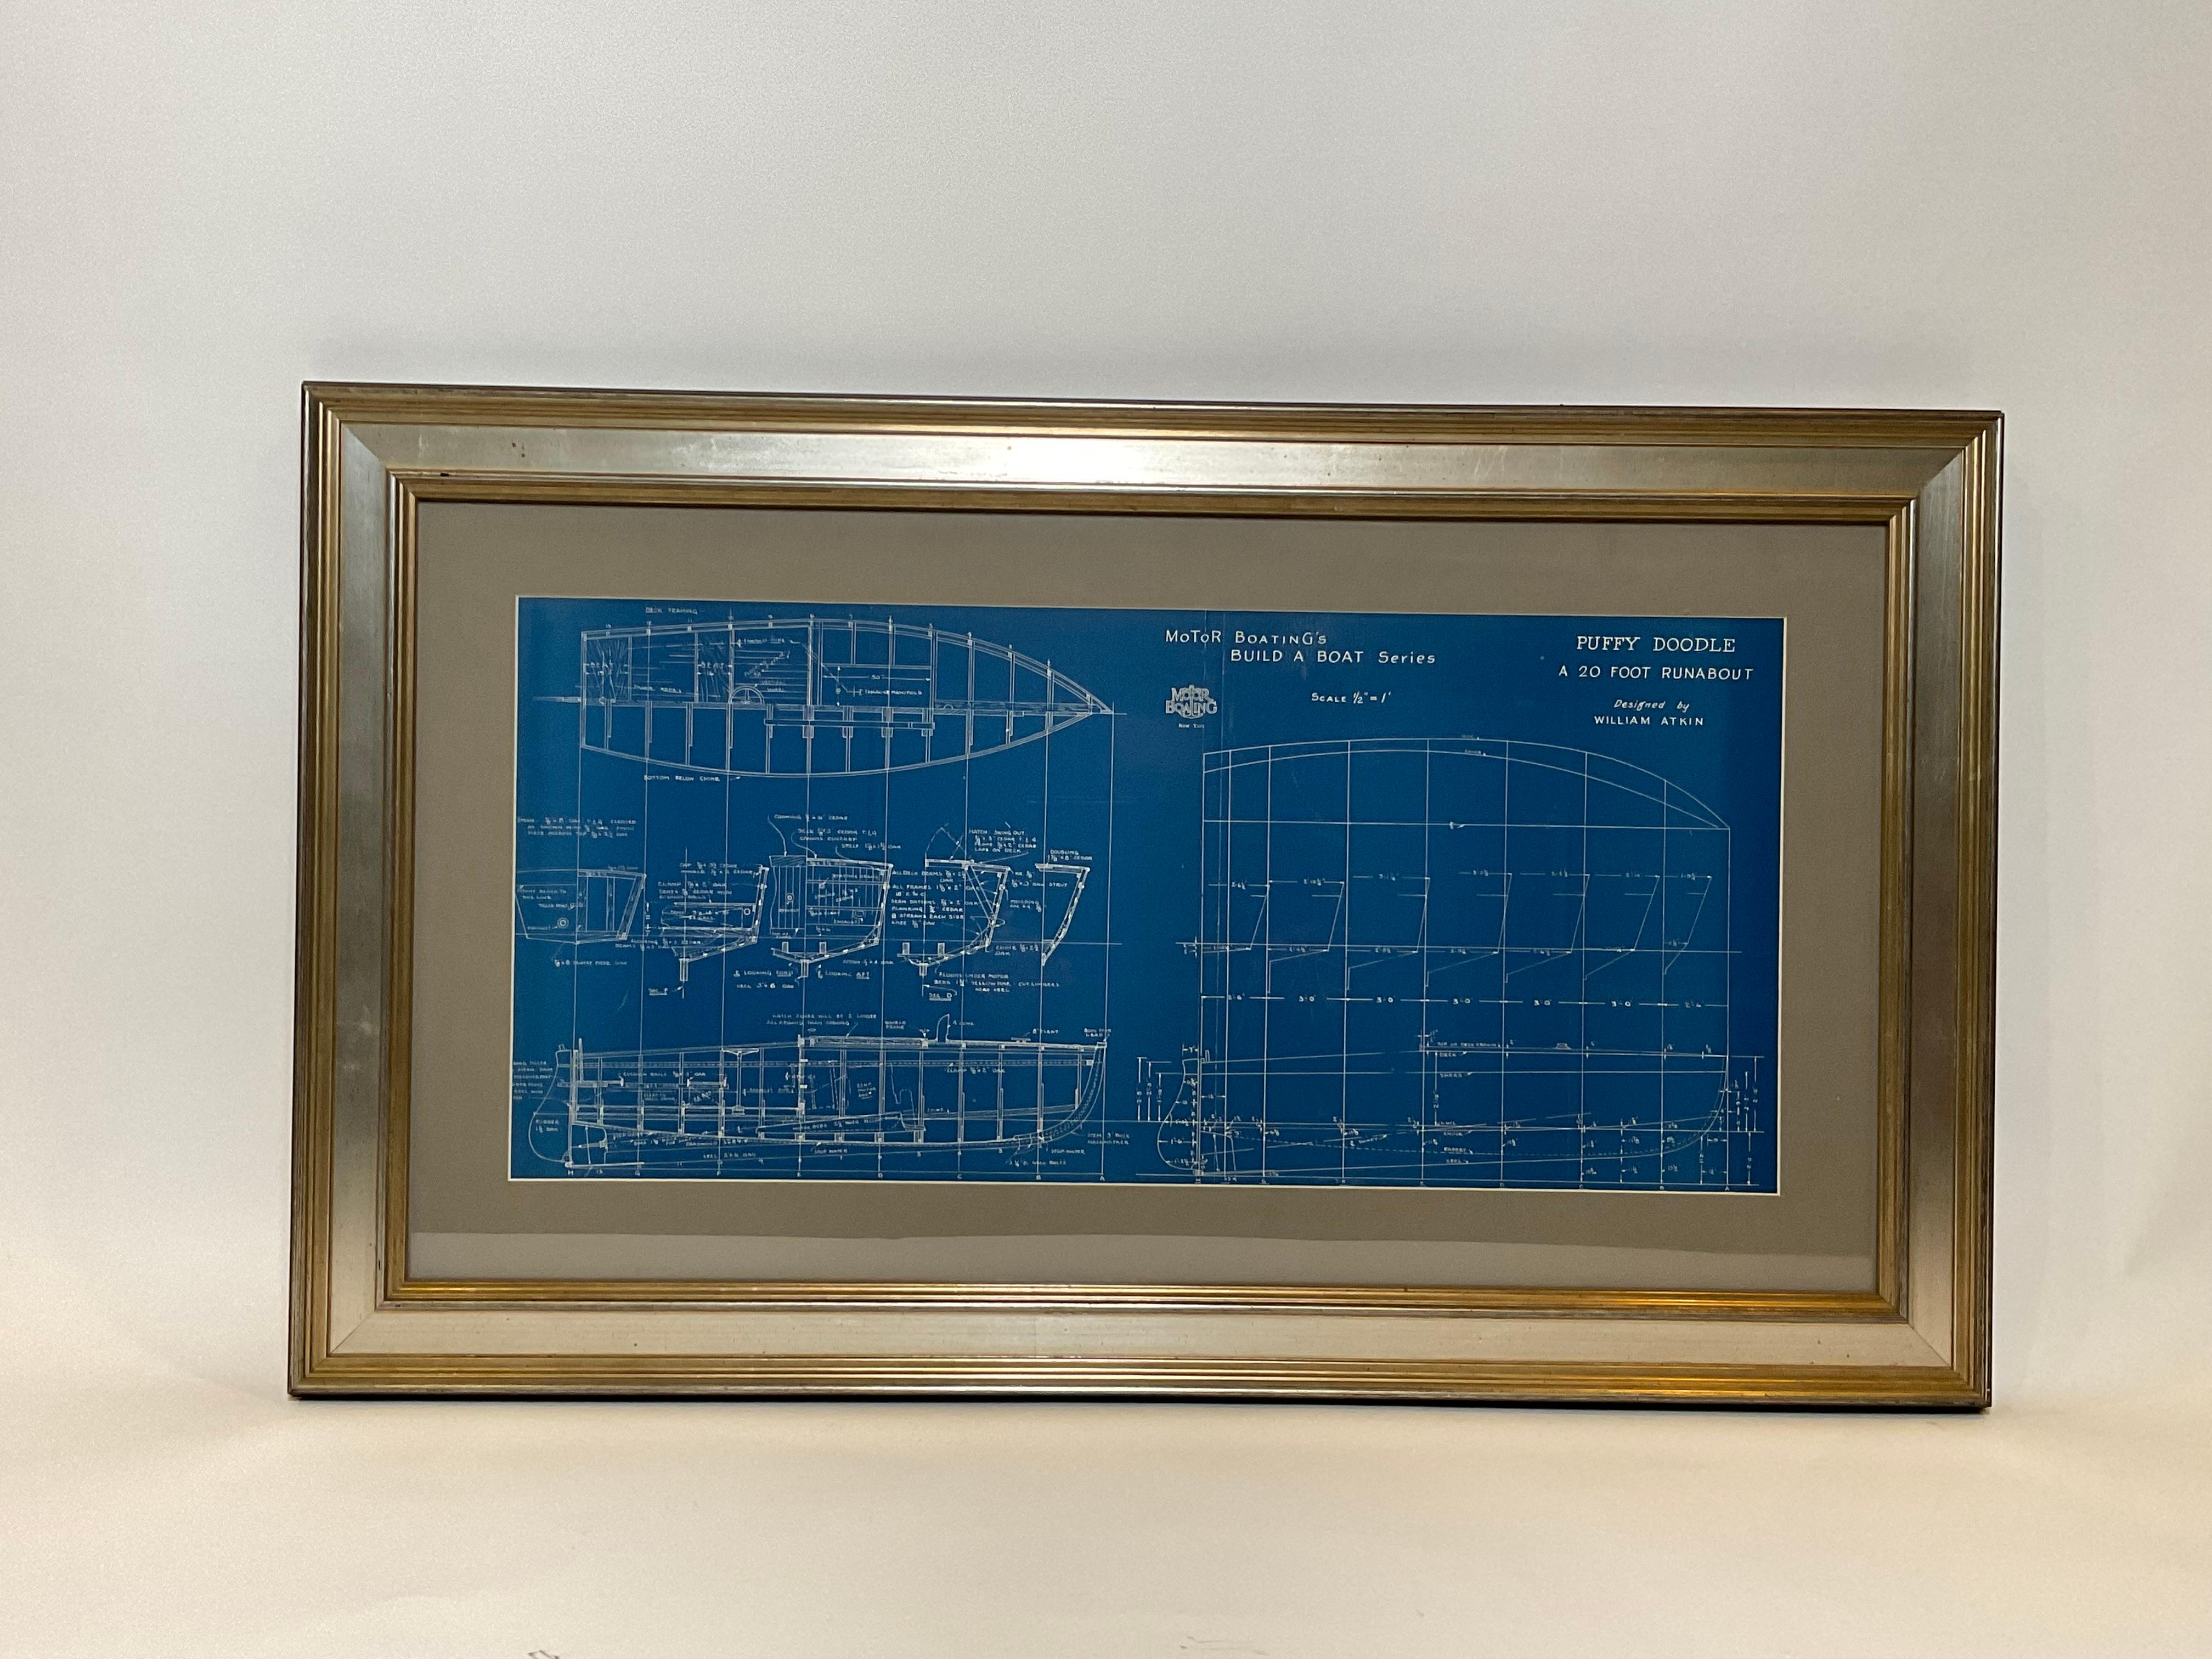 North American Boat Blueprint of the Runabout 